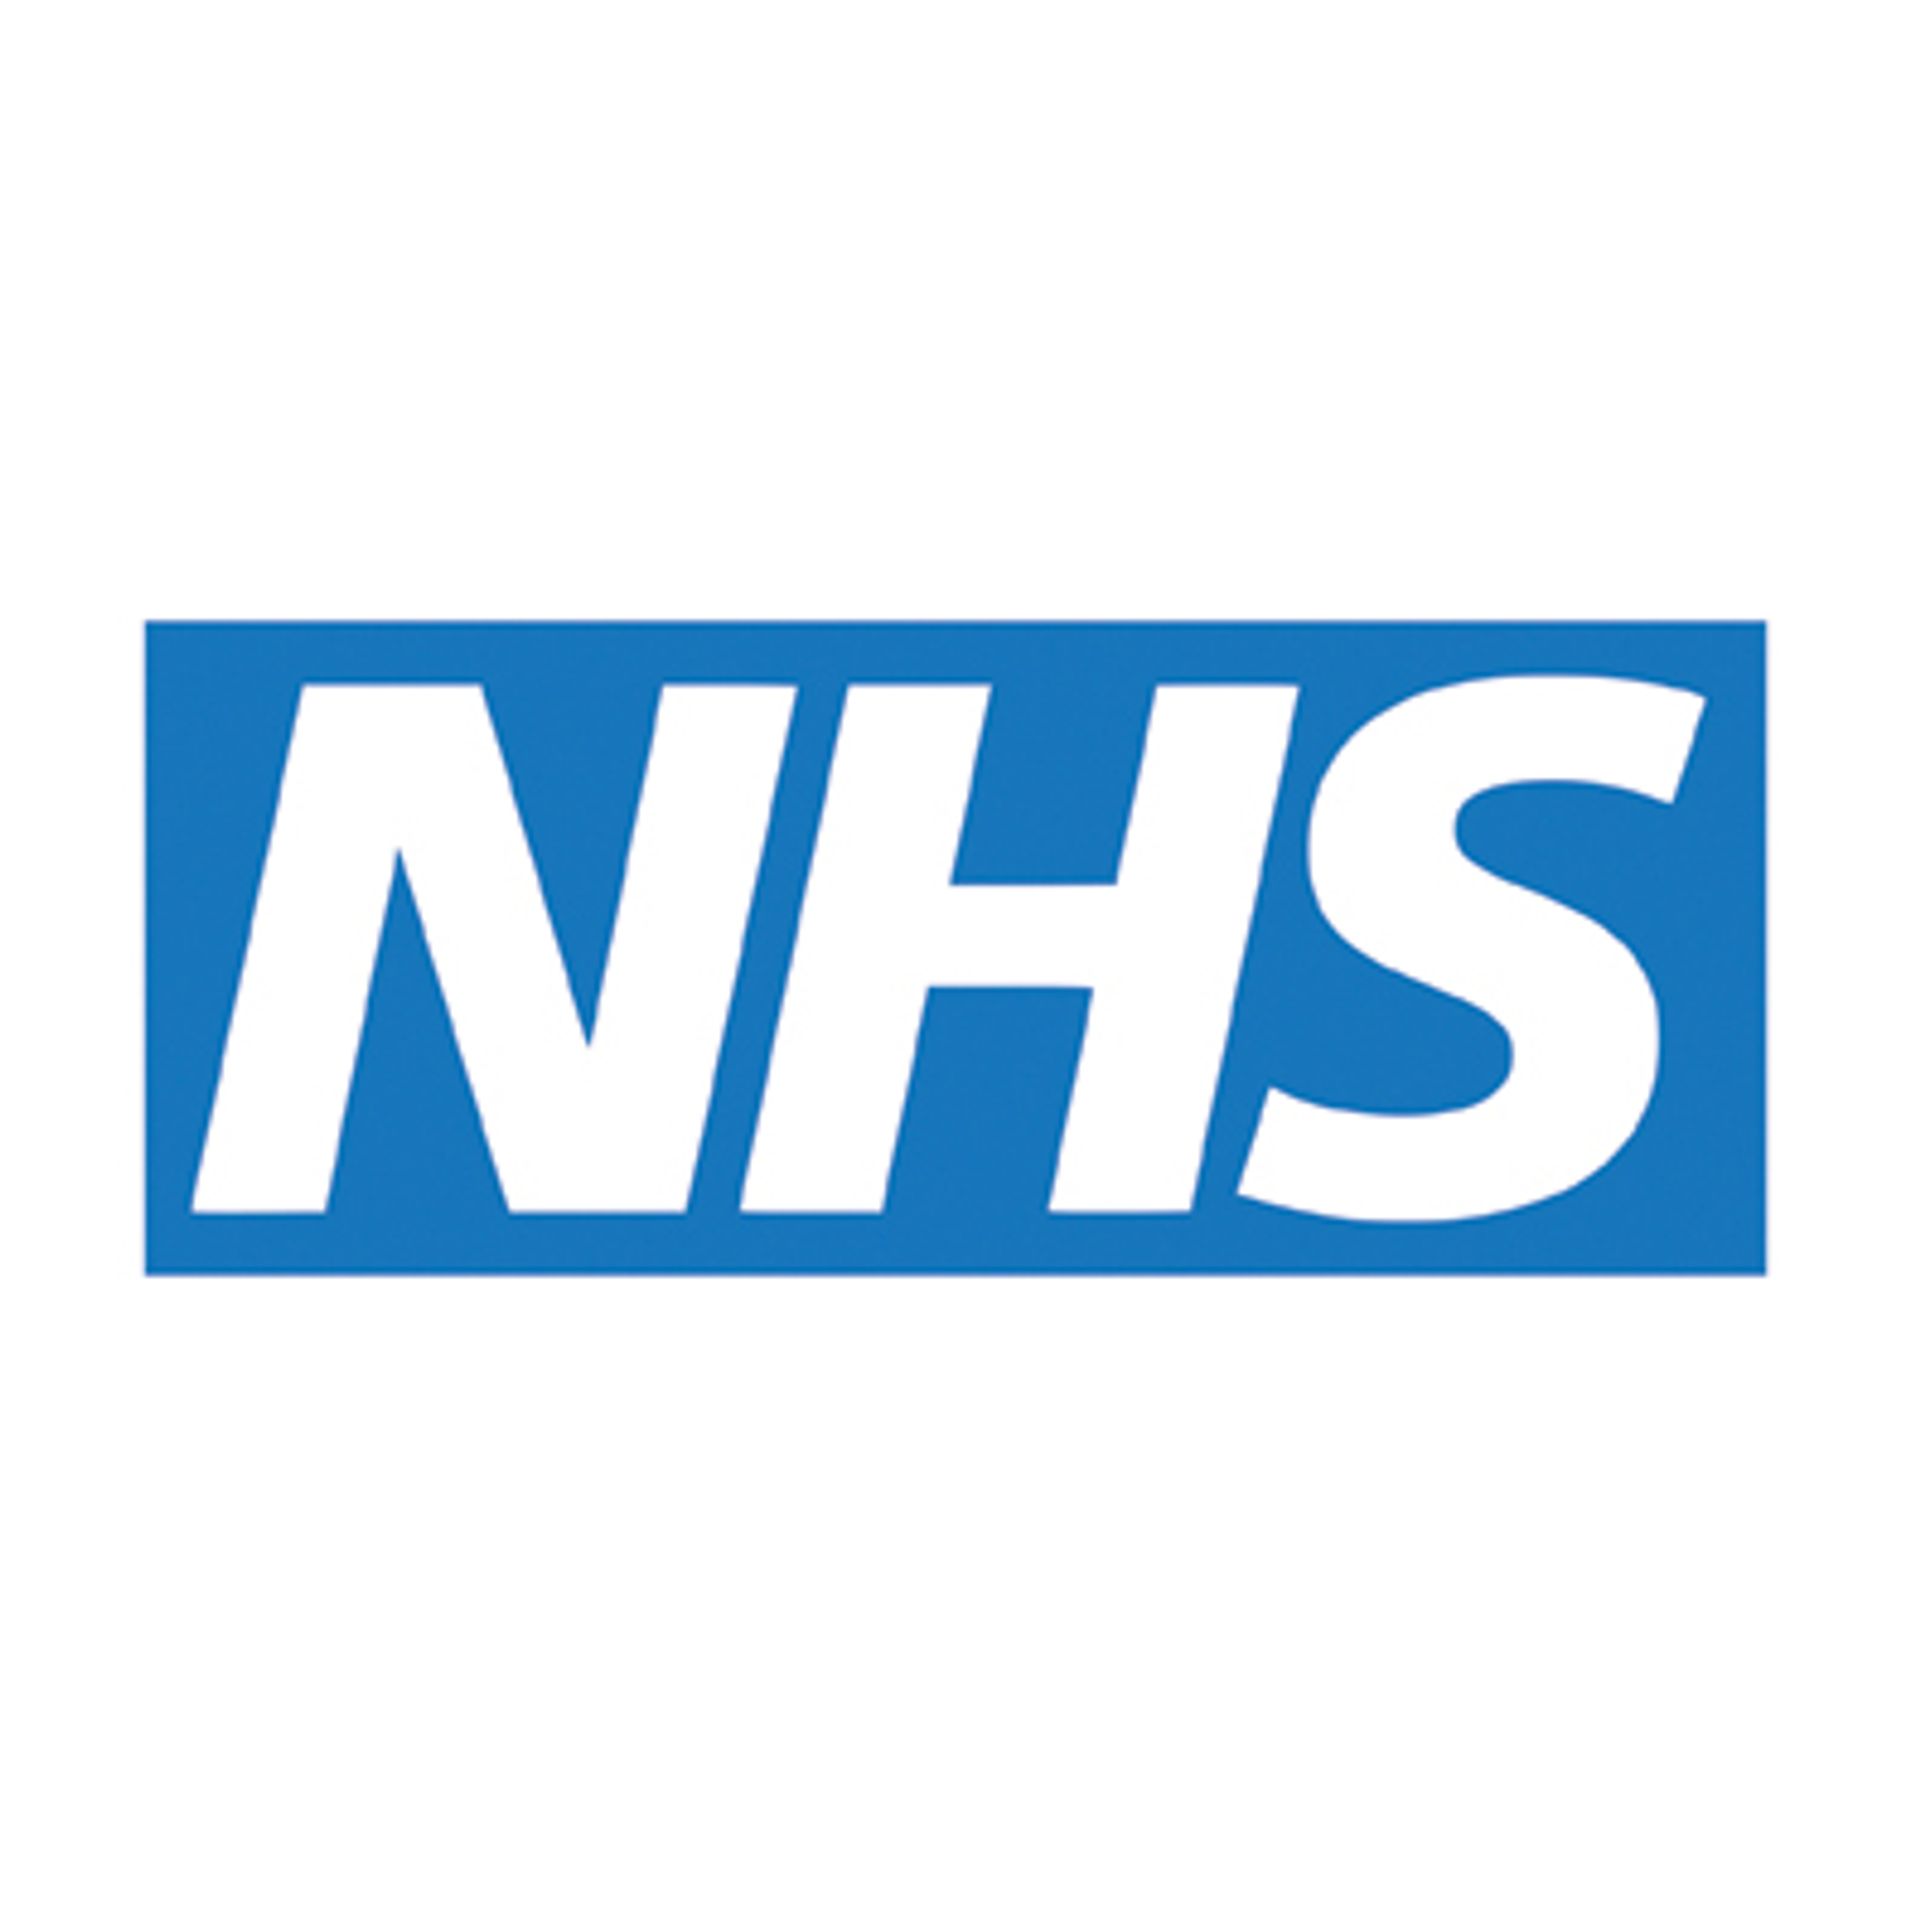 Views of NHS website heat health advice double as temperatures soar